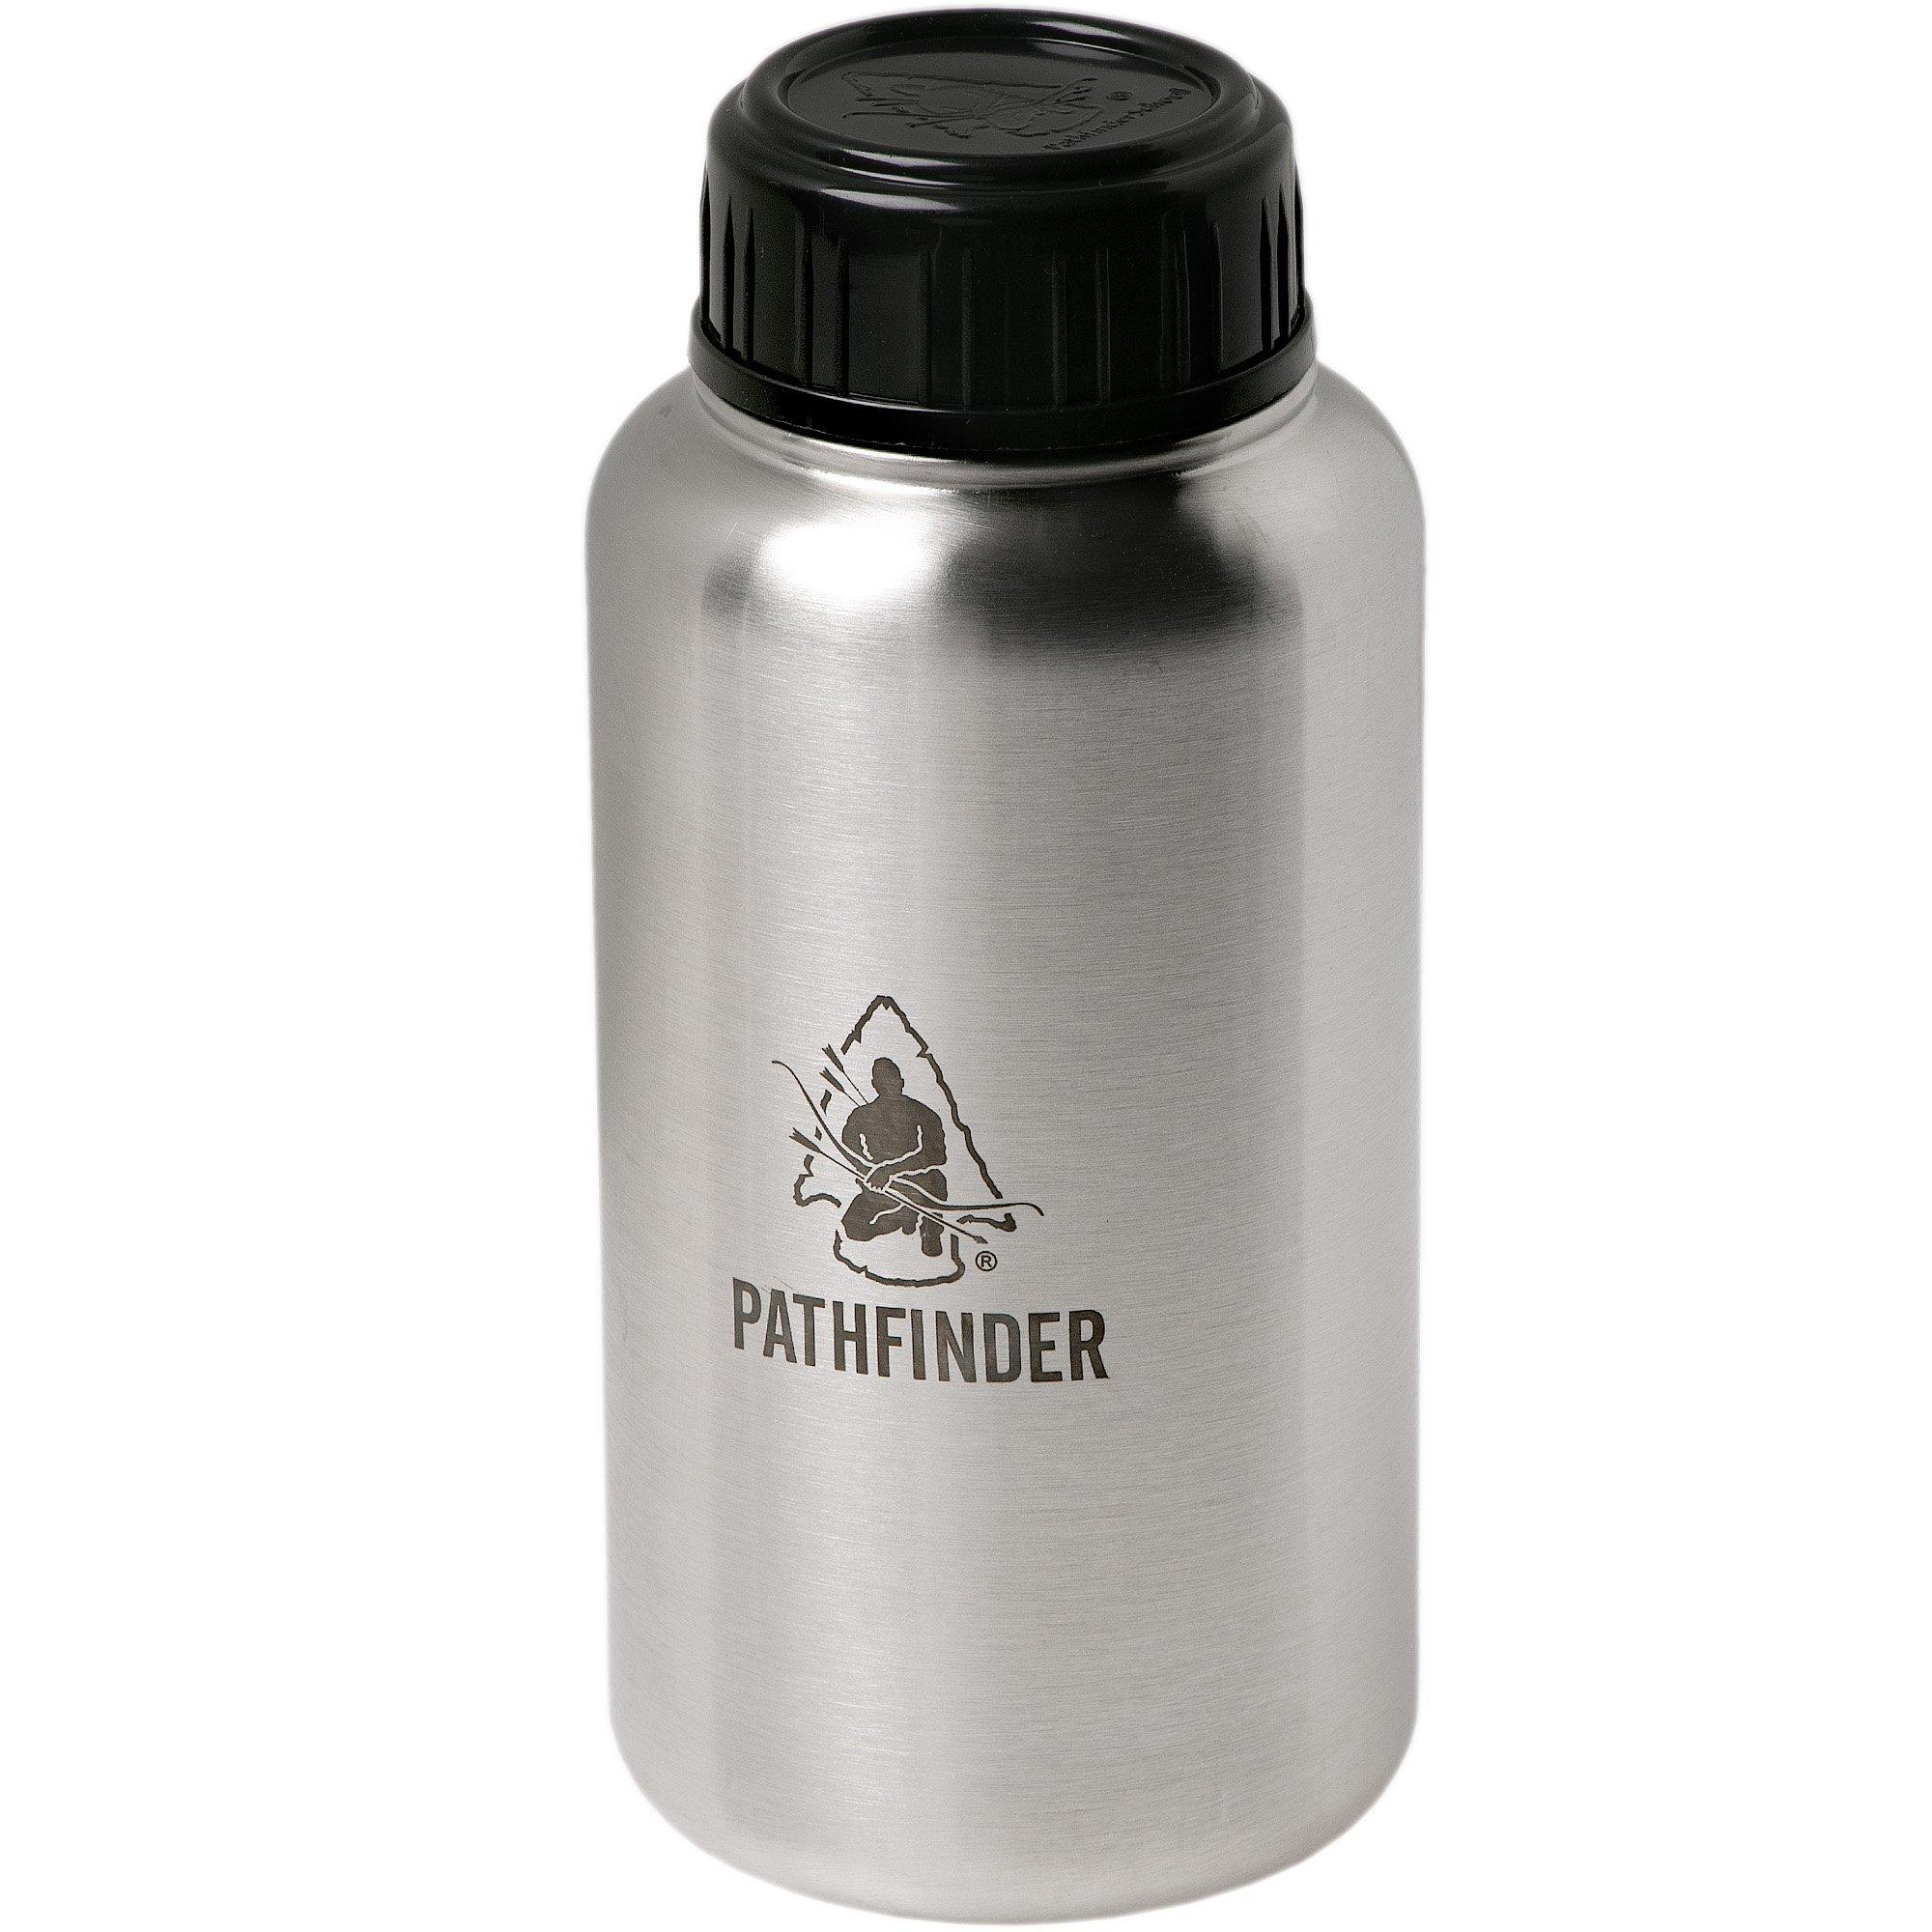 Pathfinder 32oz. Stainless Steel Water Bottle & Nesting Cup Set